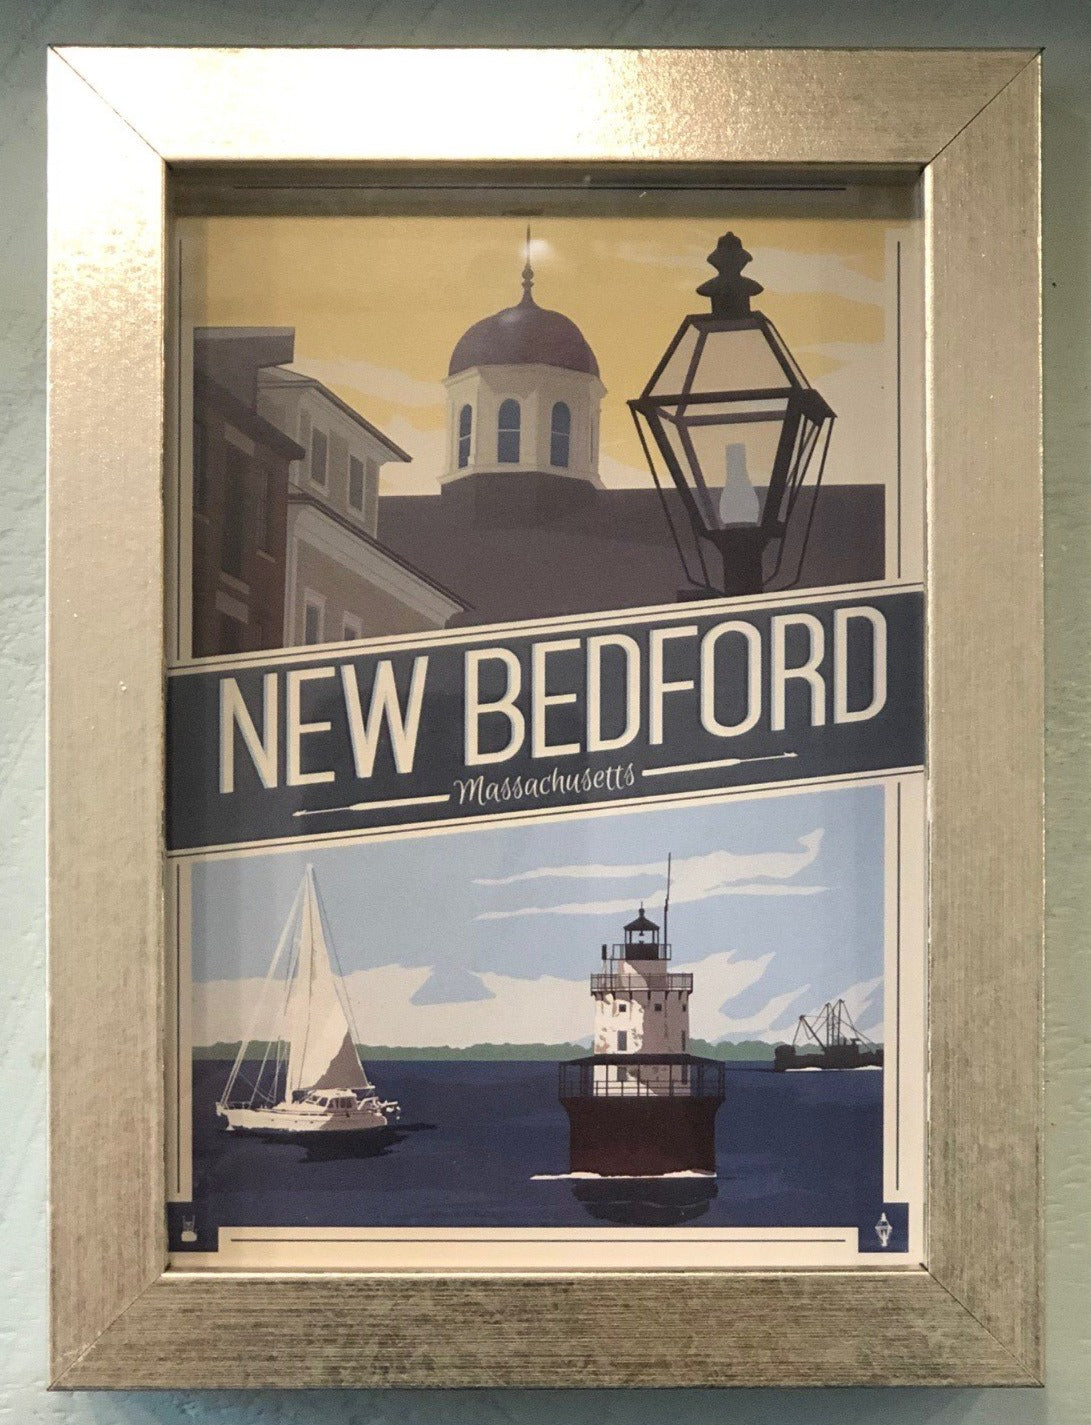 New Bedford Post Card, Montage